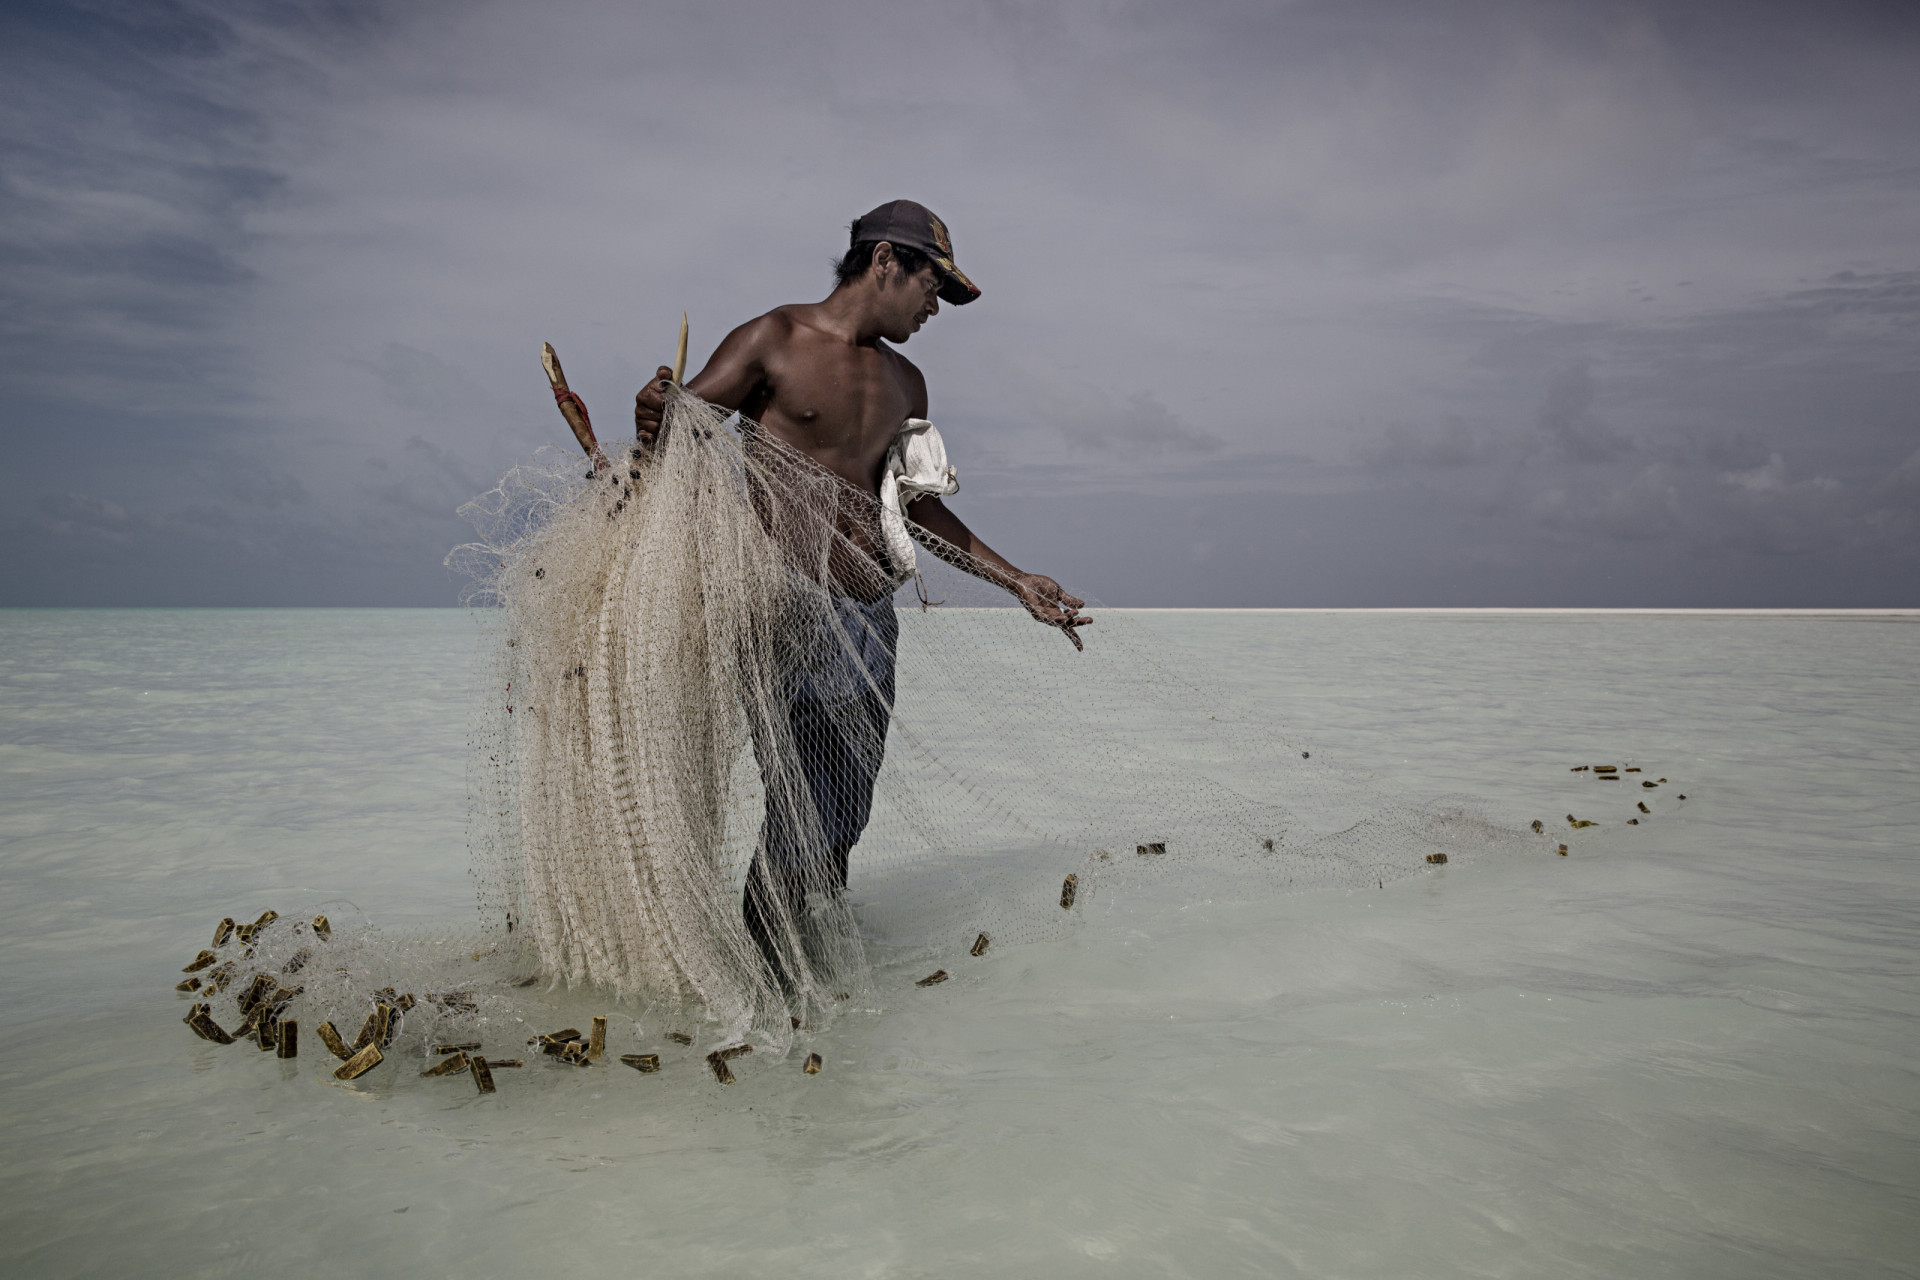 <p>Traditional fishing techniques on the islands use canoes and nets, but recent years have seen residents of Kiribati turn to more modern methods. Fish is a staple in the diet and a key part of the nation’s economy.</p><p><a href="https://www.msn.com/en-us/community/channel/vid-7xx8mnucu55yw63we9va2gwr7uihbxwc68fxqp25x6tg4ftibpra?cvid=94631541bc0f4f89bfd59158d696ad7e">Follow us and access great exclusive content every day</a></p>